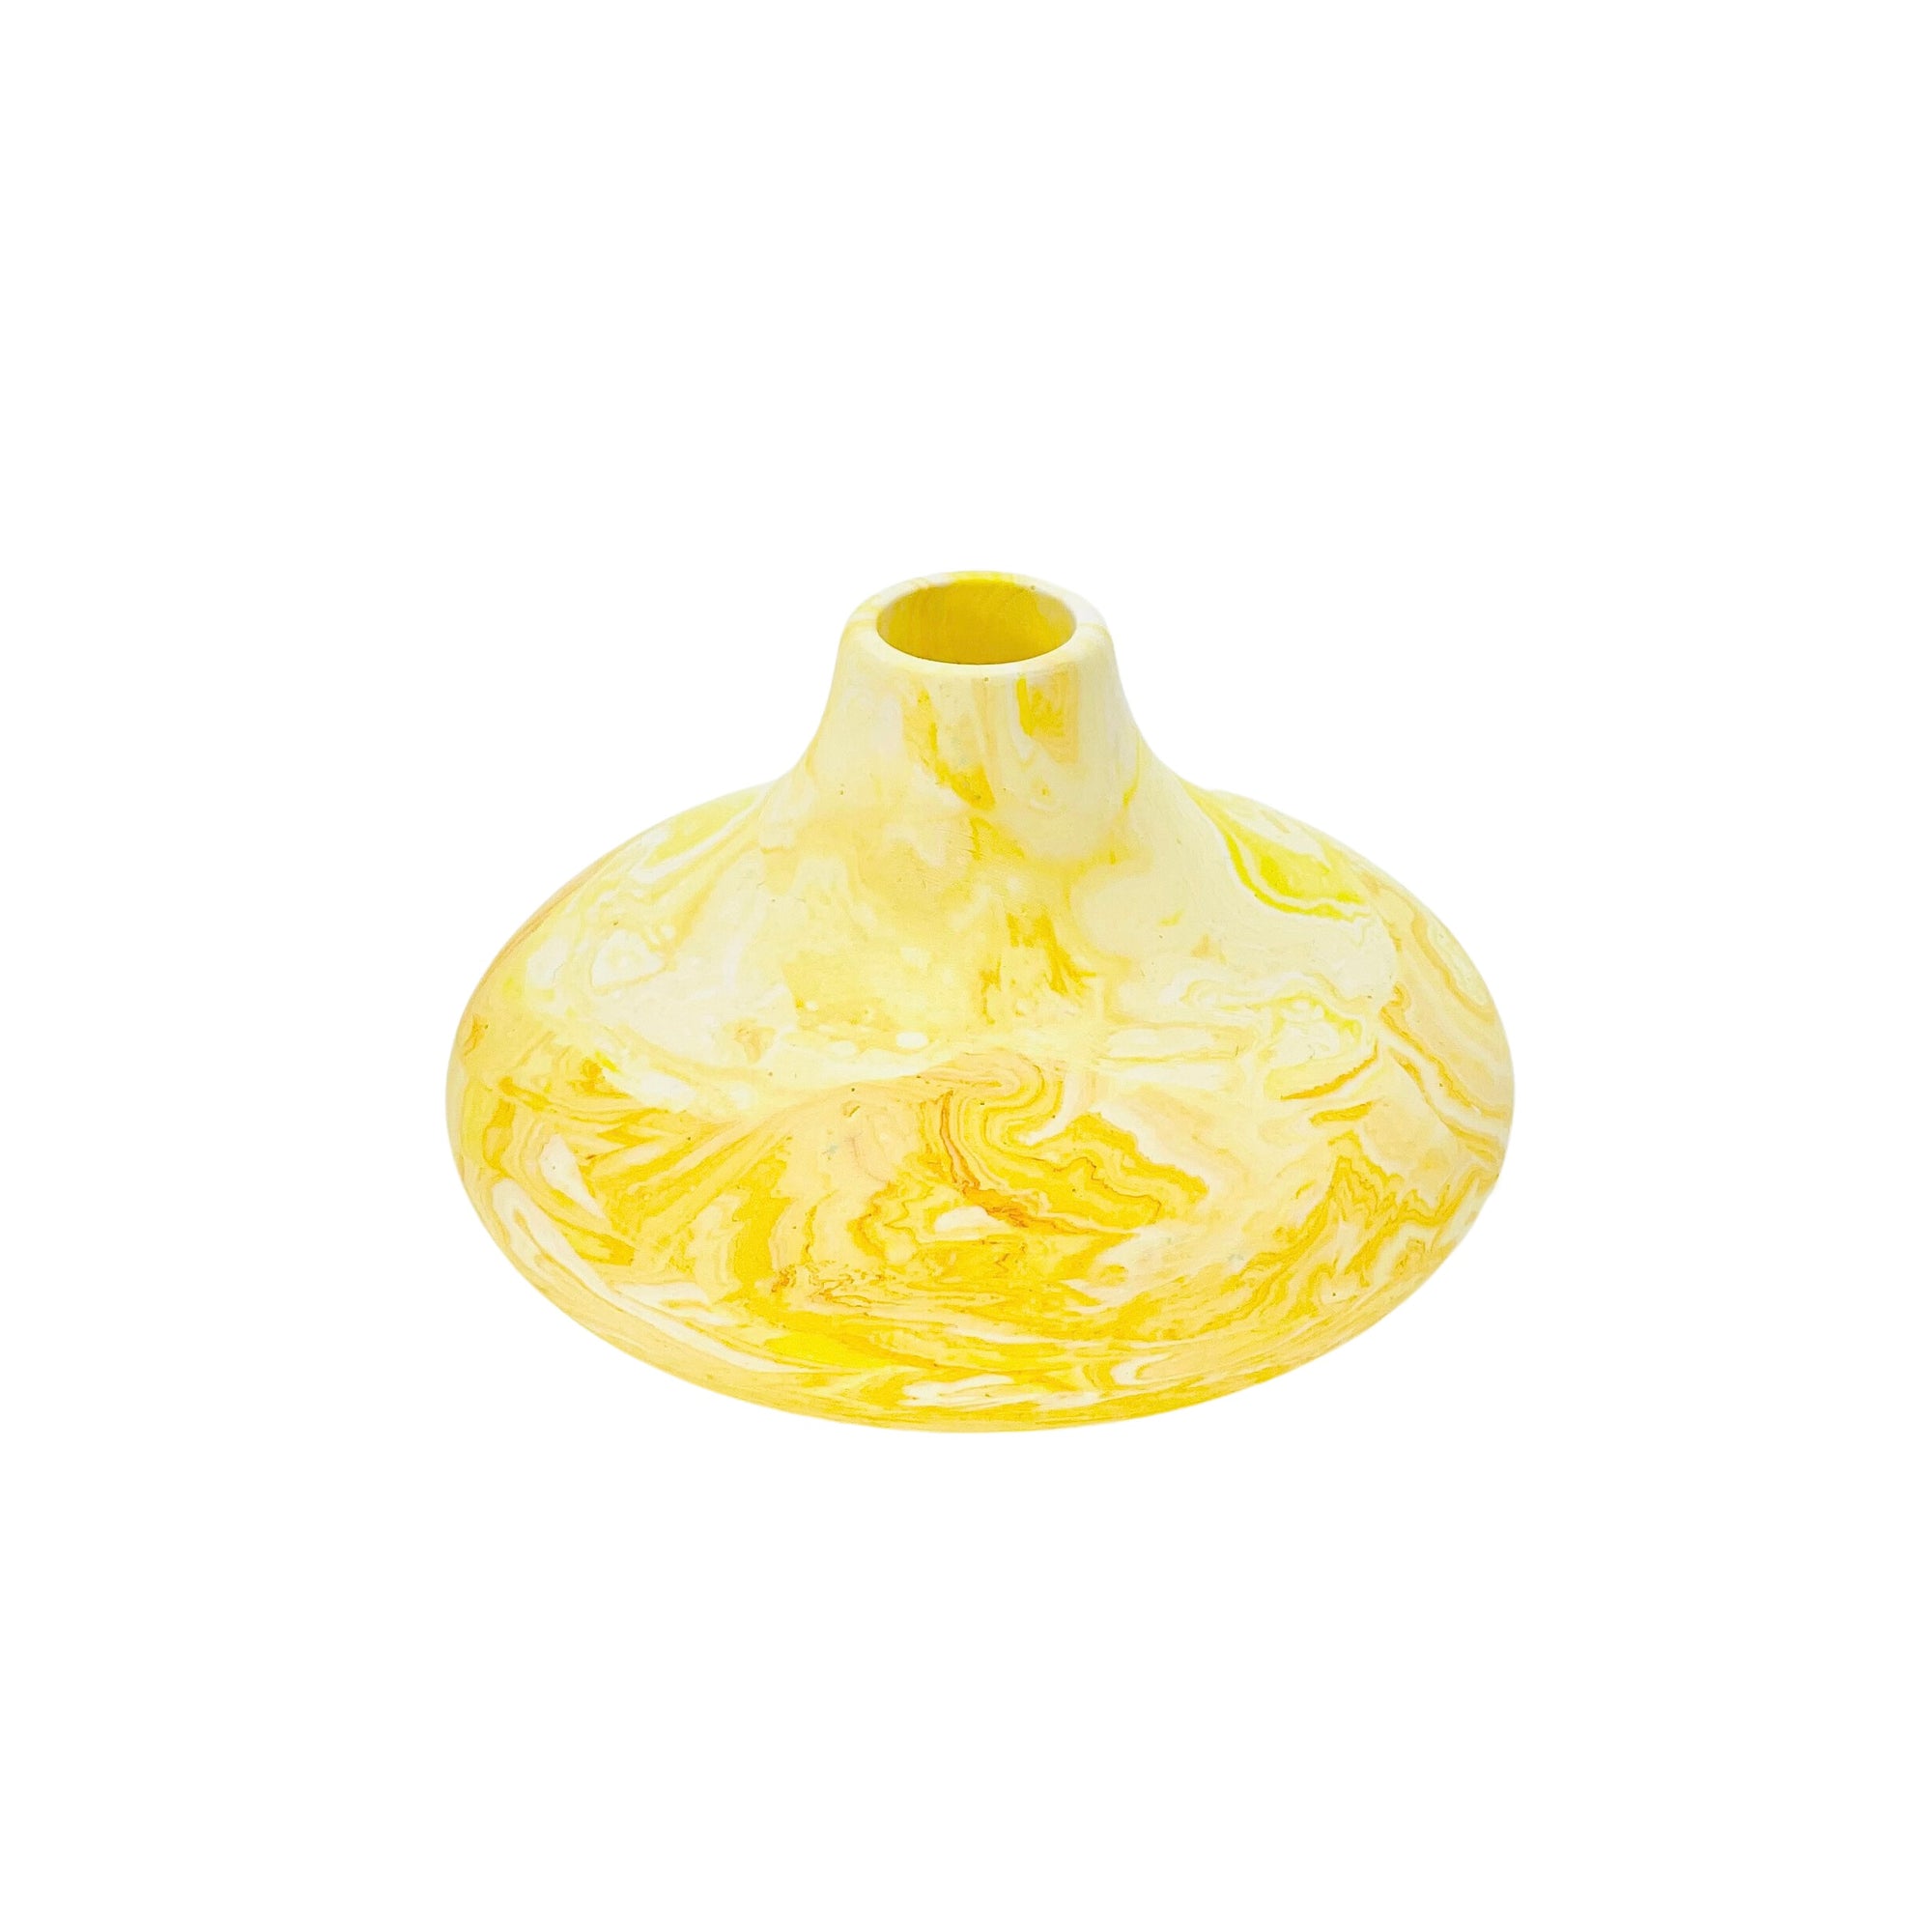 This small bulbous Jesmonite vase is marbled with yellow pigment.